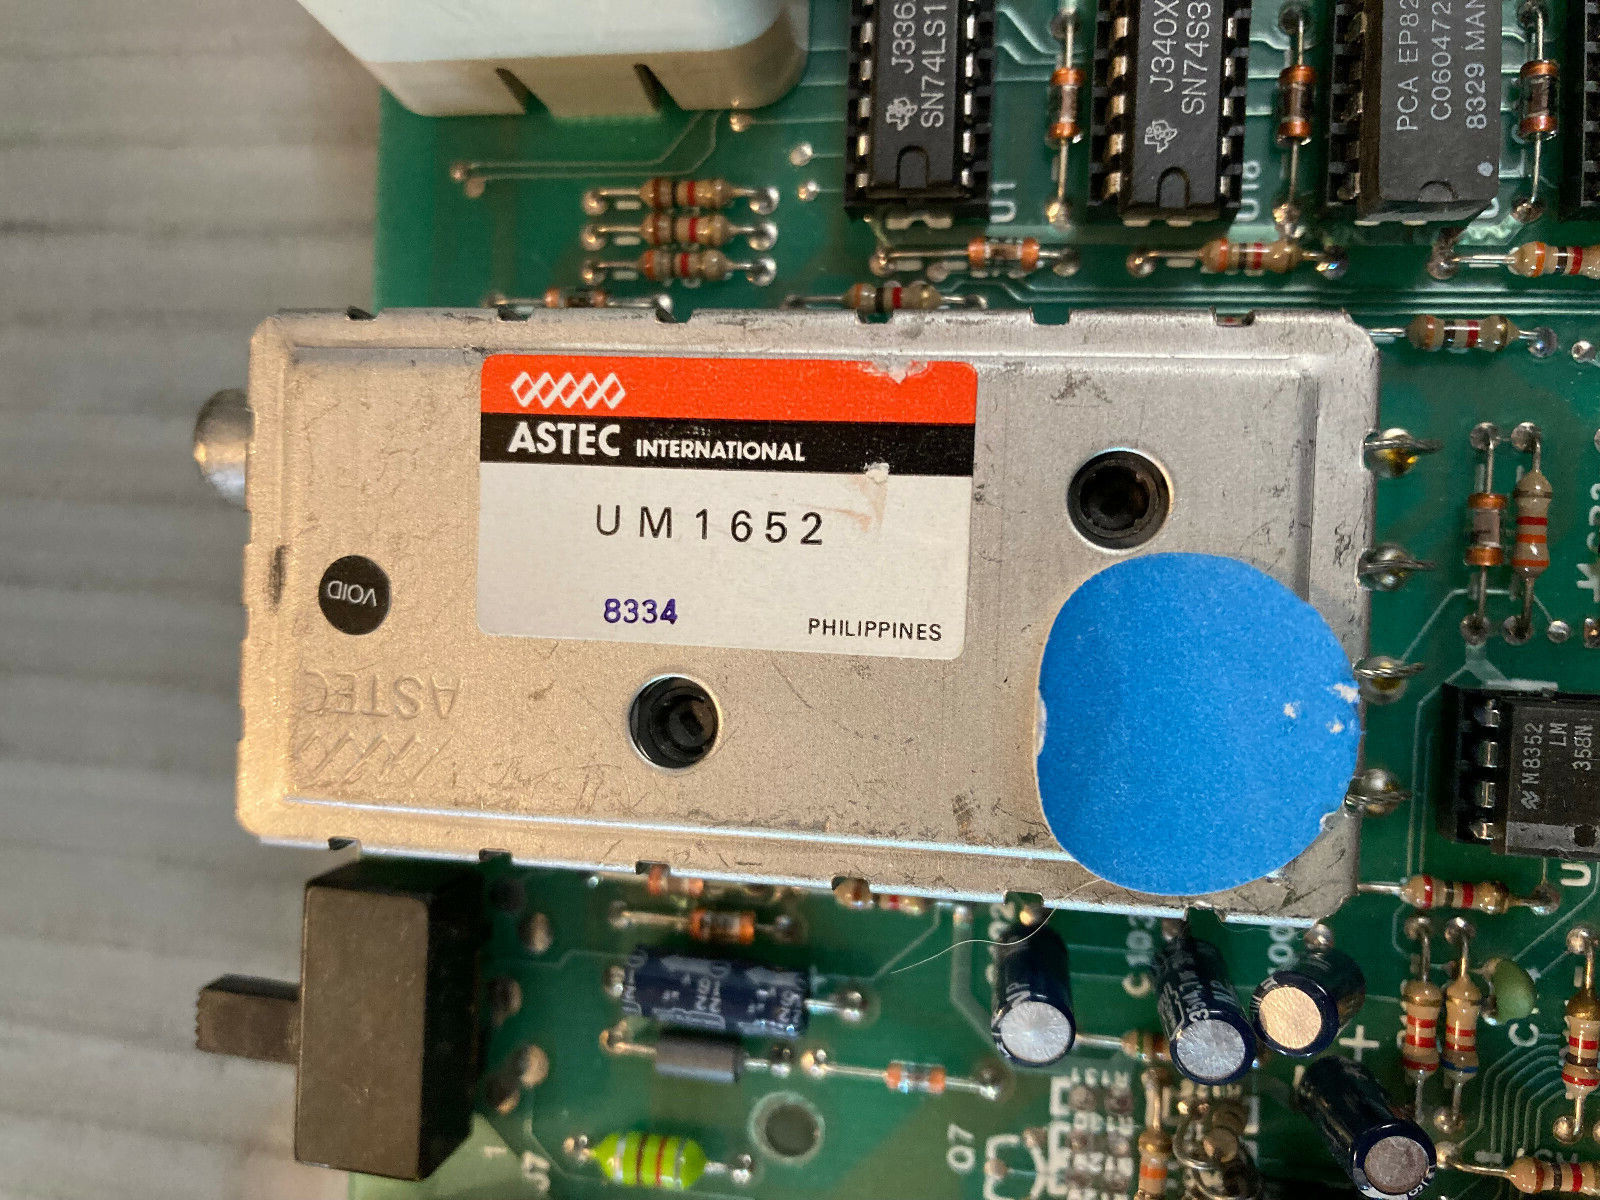 RF Modulator for Atari 800XL/600XL Removed from computer